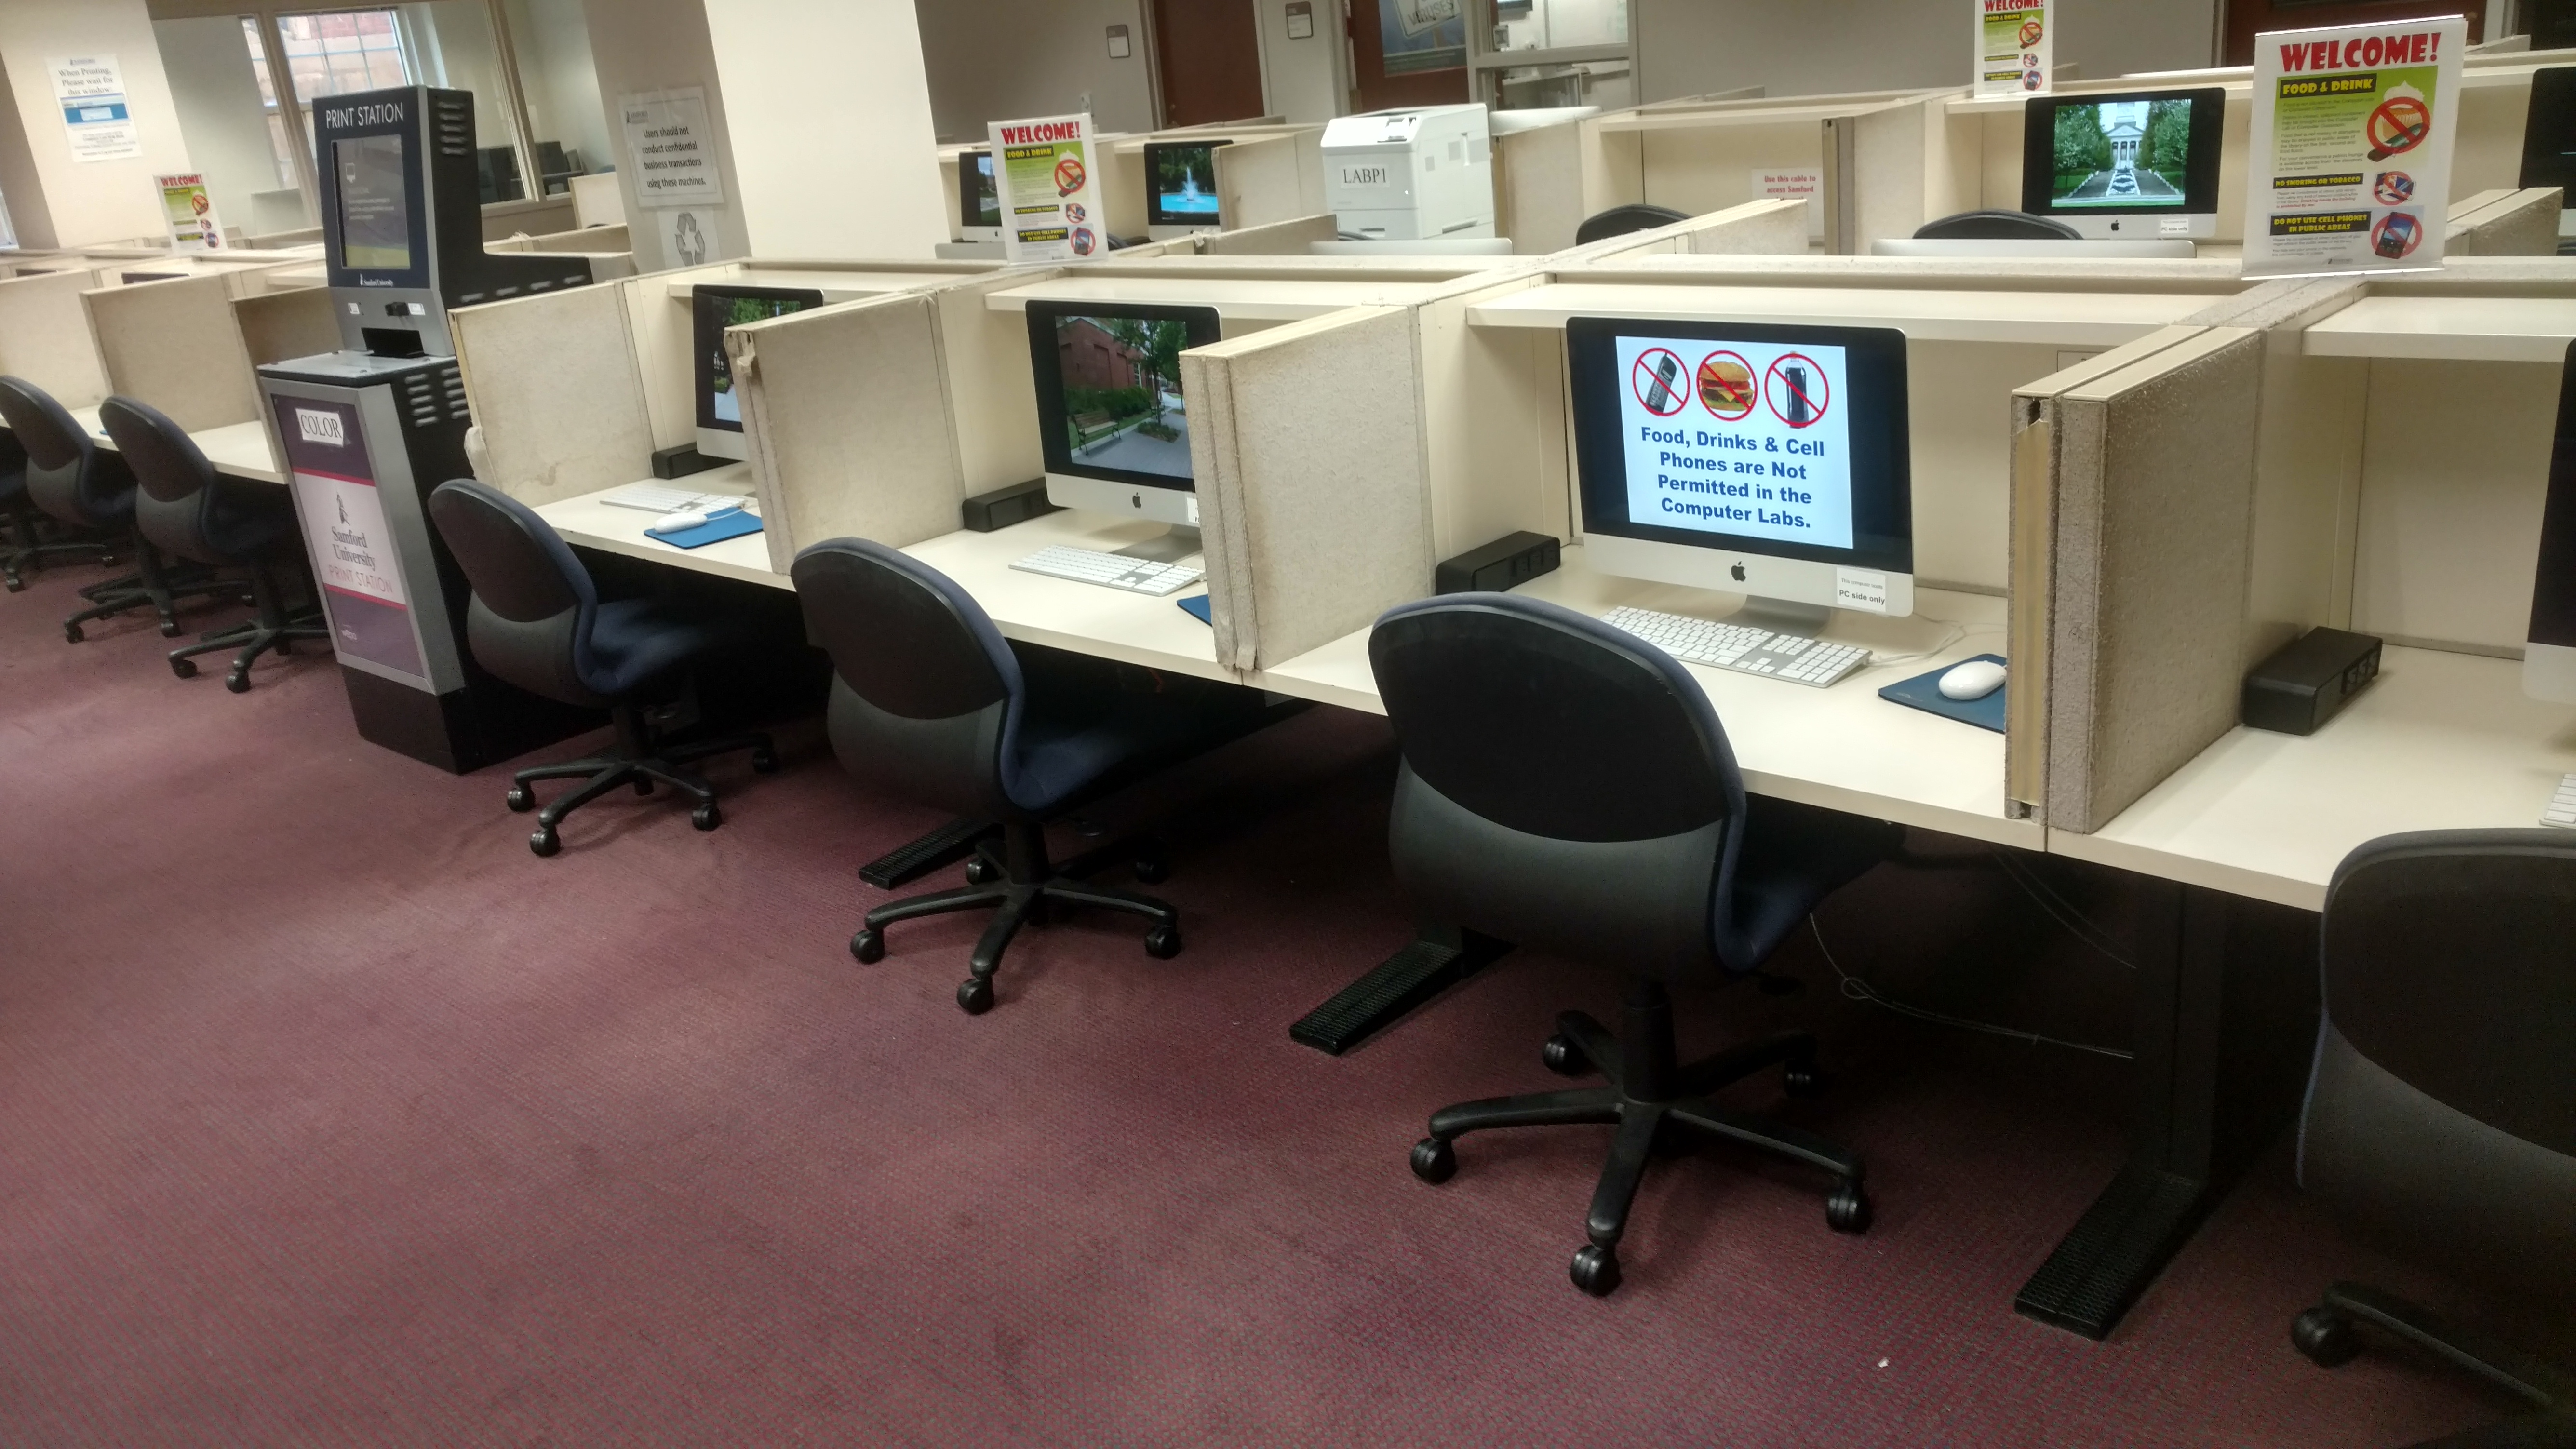 Students working in the main academic computing lab